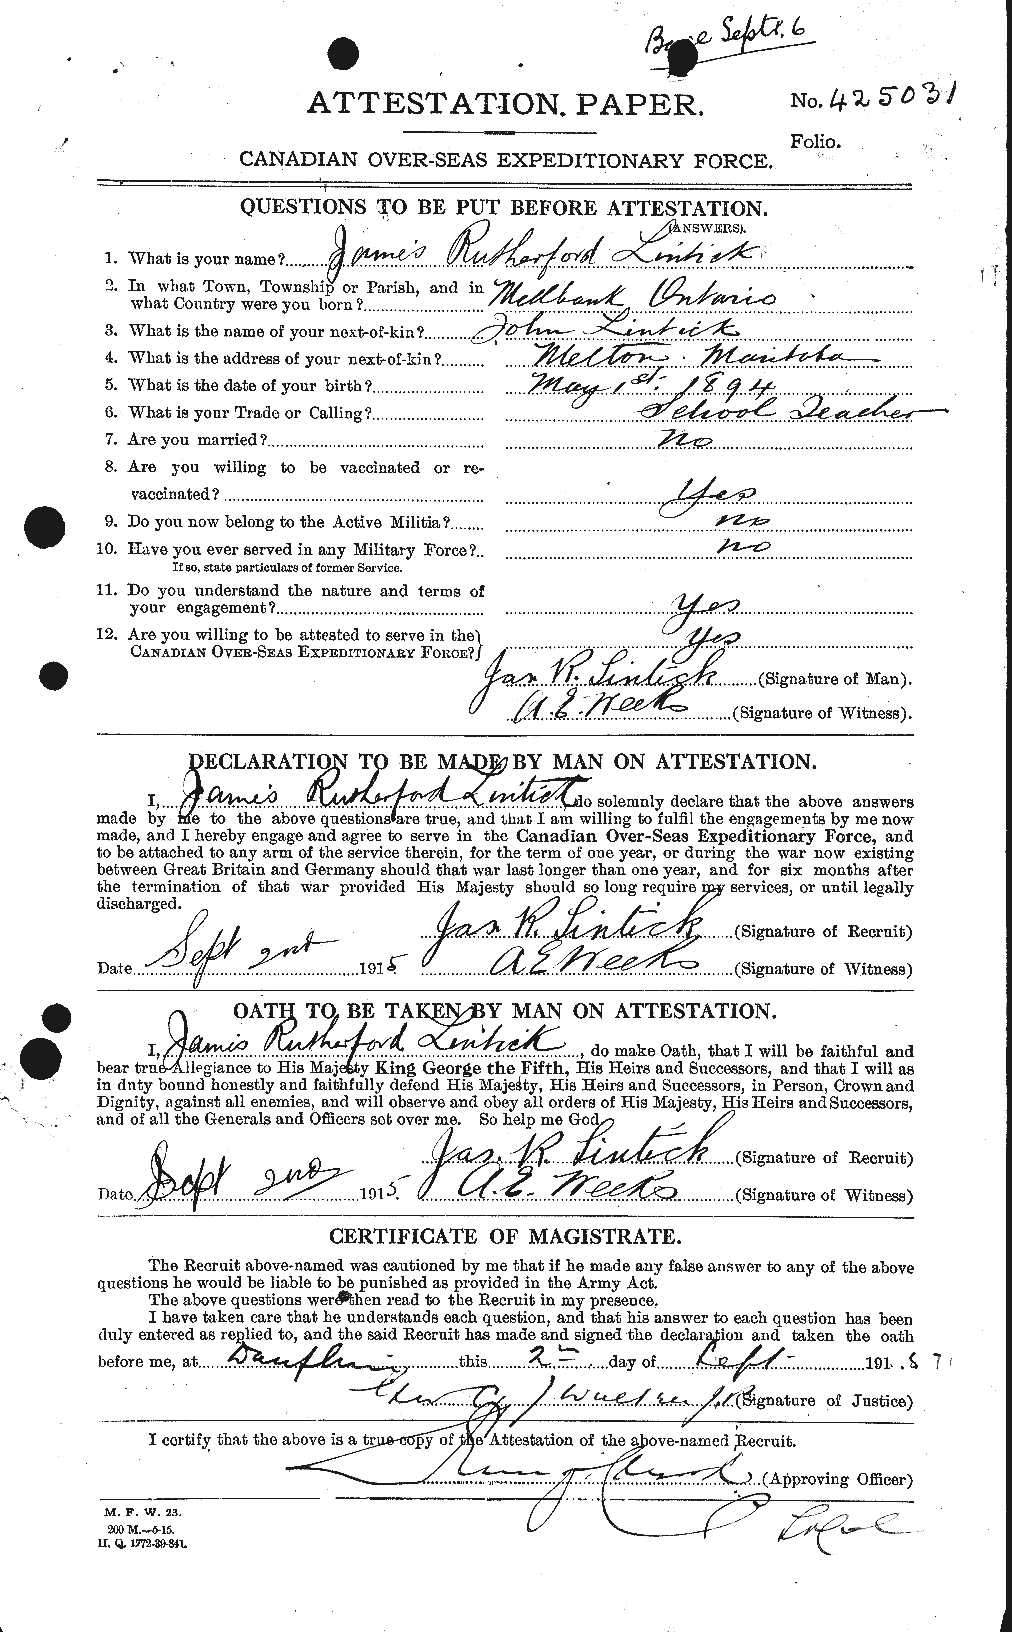 Personnel Records of the First World War - CEF 468707a